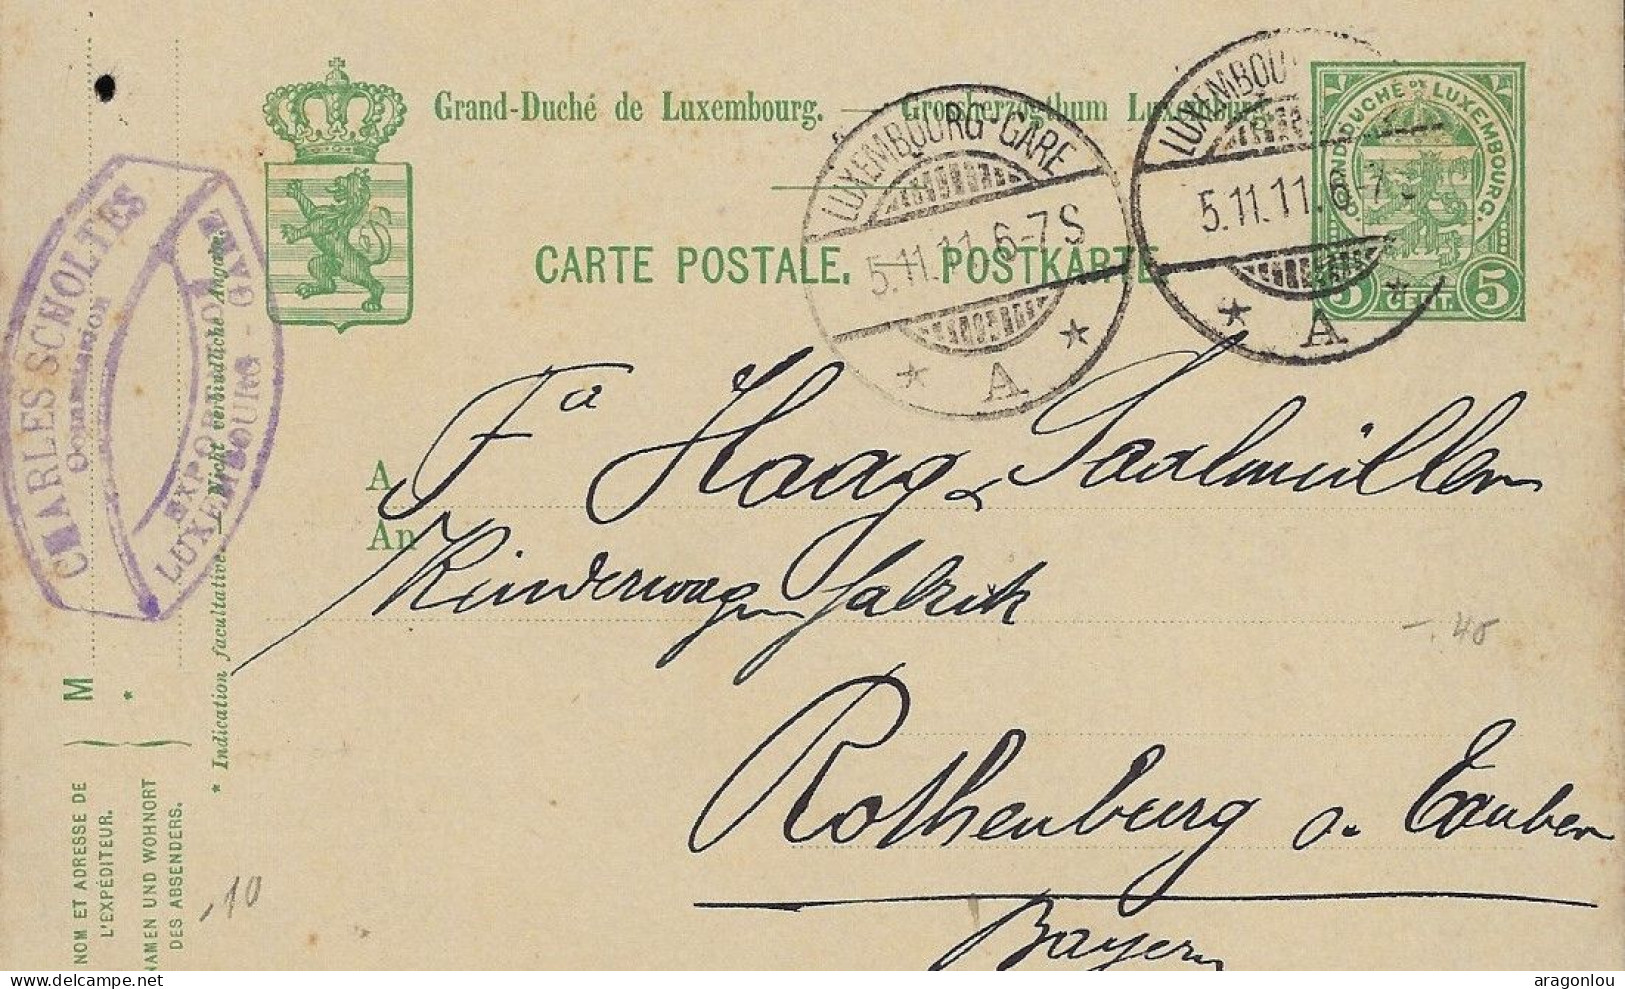 Luxembourg - Luxemburg - Carte-Postale  1911  -  Cachet  Luxembourg-Gare - Stamped Stationery